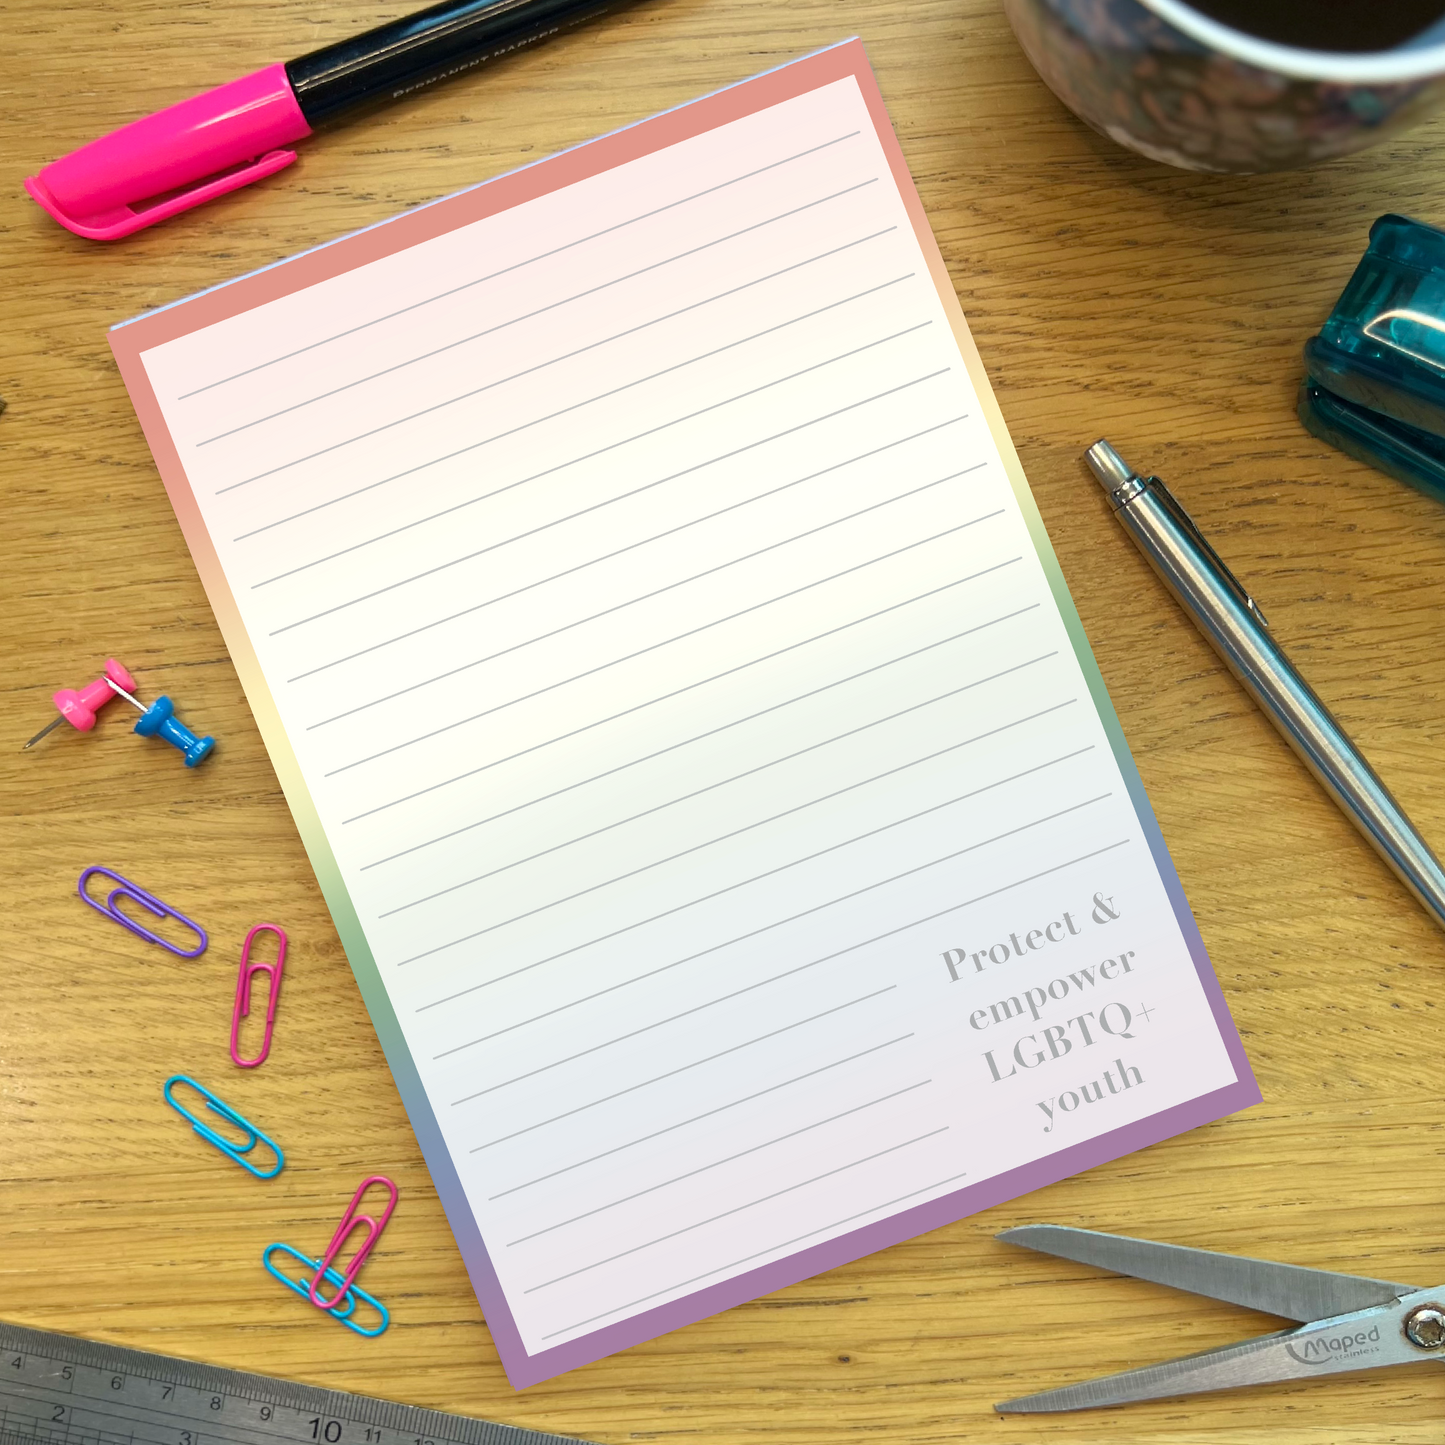 Rainbow pride notepad with quote Protect and empower LGBTQ youth, on a wooden desk with stationery